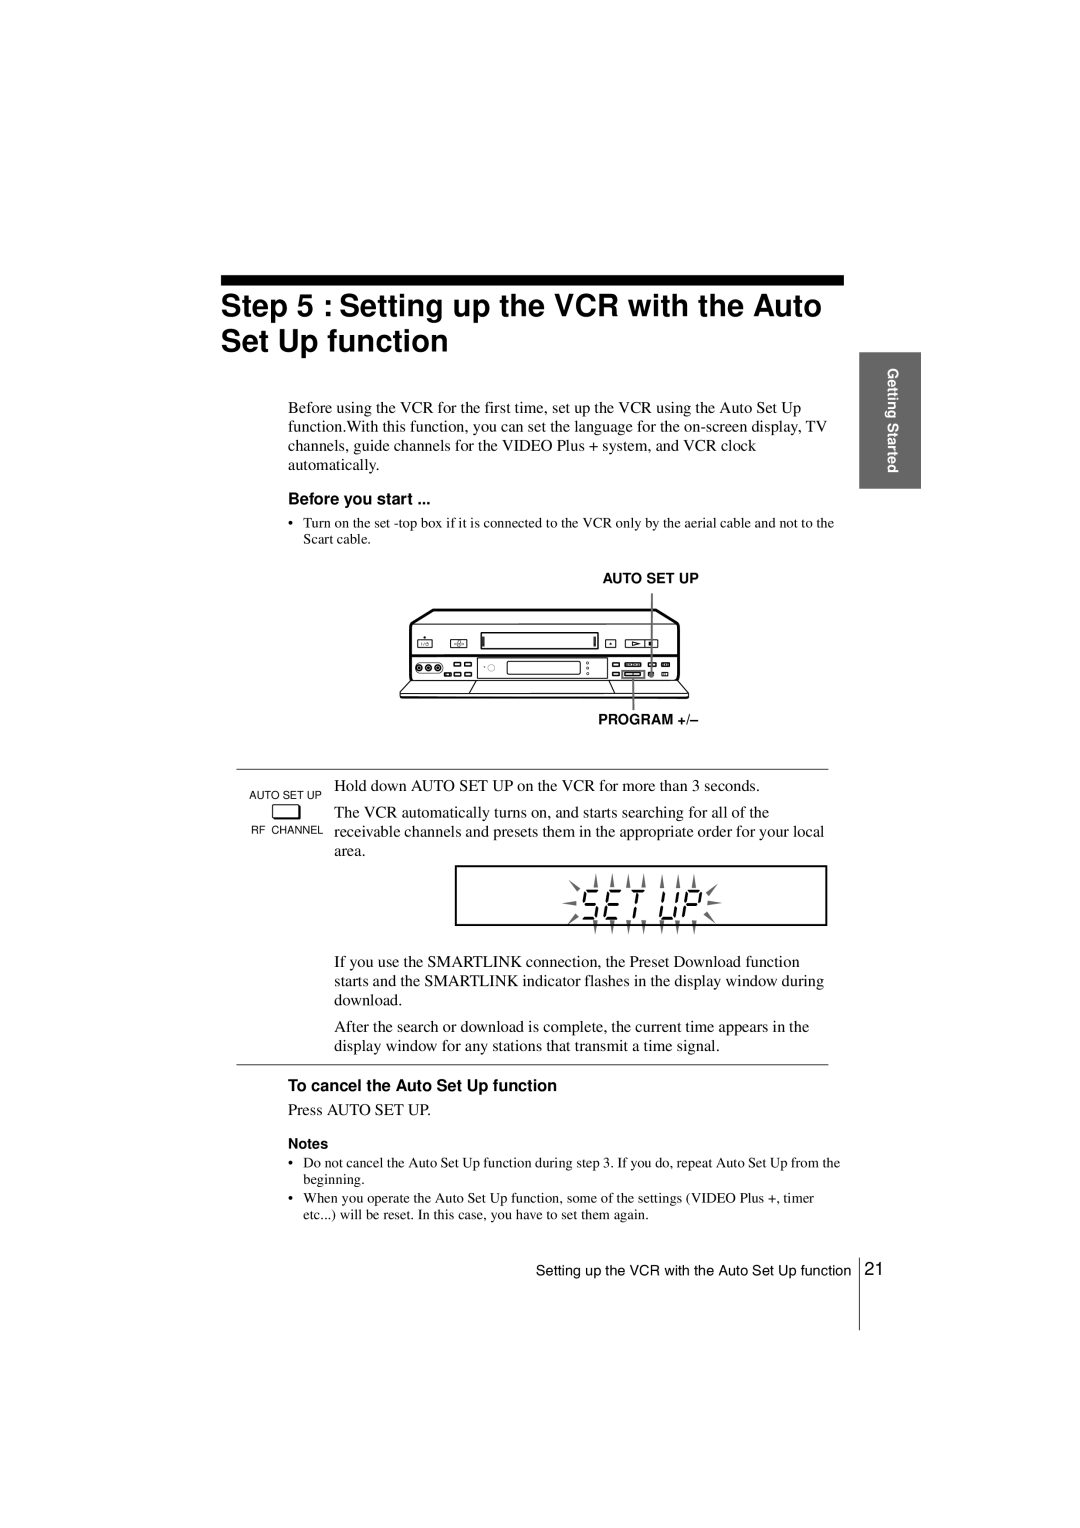 Sony SLV-SF990G Setting up the VCR with the Auto Set Up function, Before you start, To cancel the Auto Set Up function 